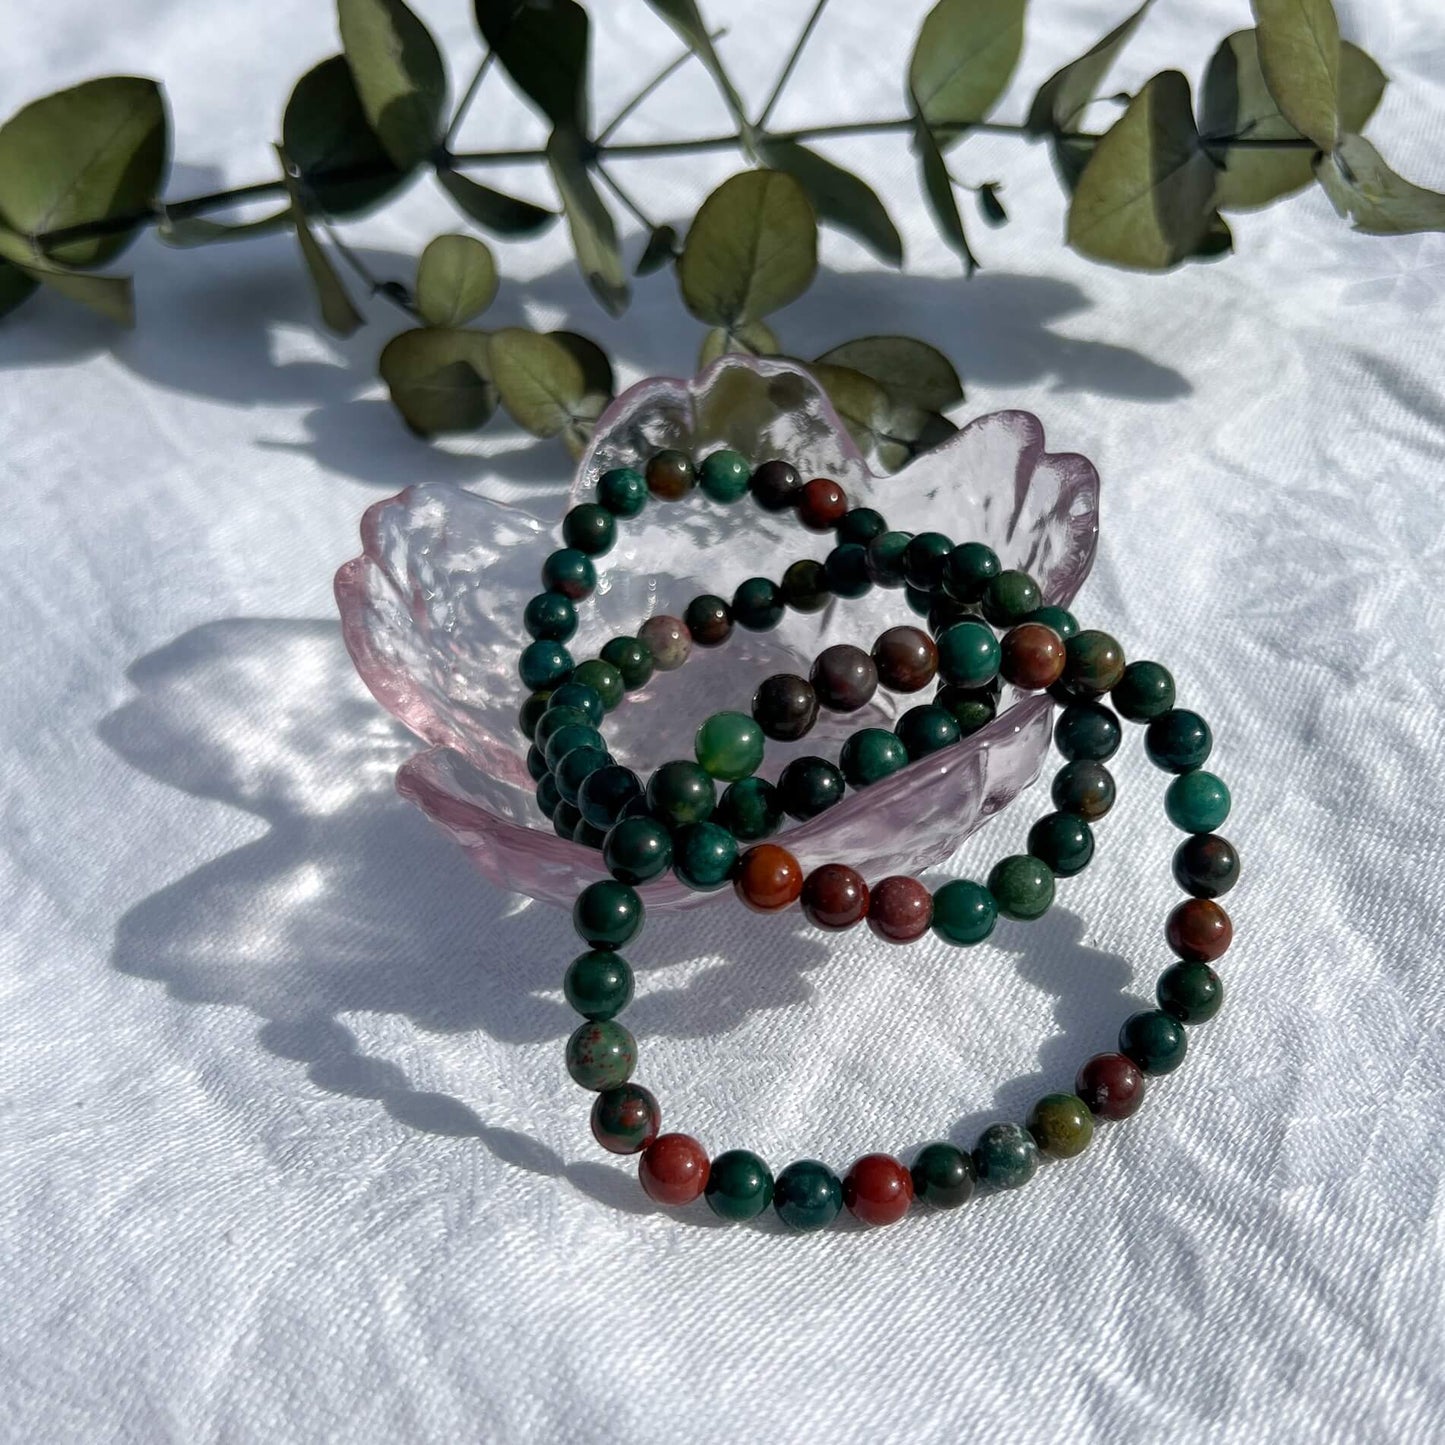 A glass trinket dish filled with green & red Bloodstone crystal bead bracelets